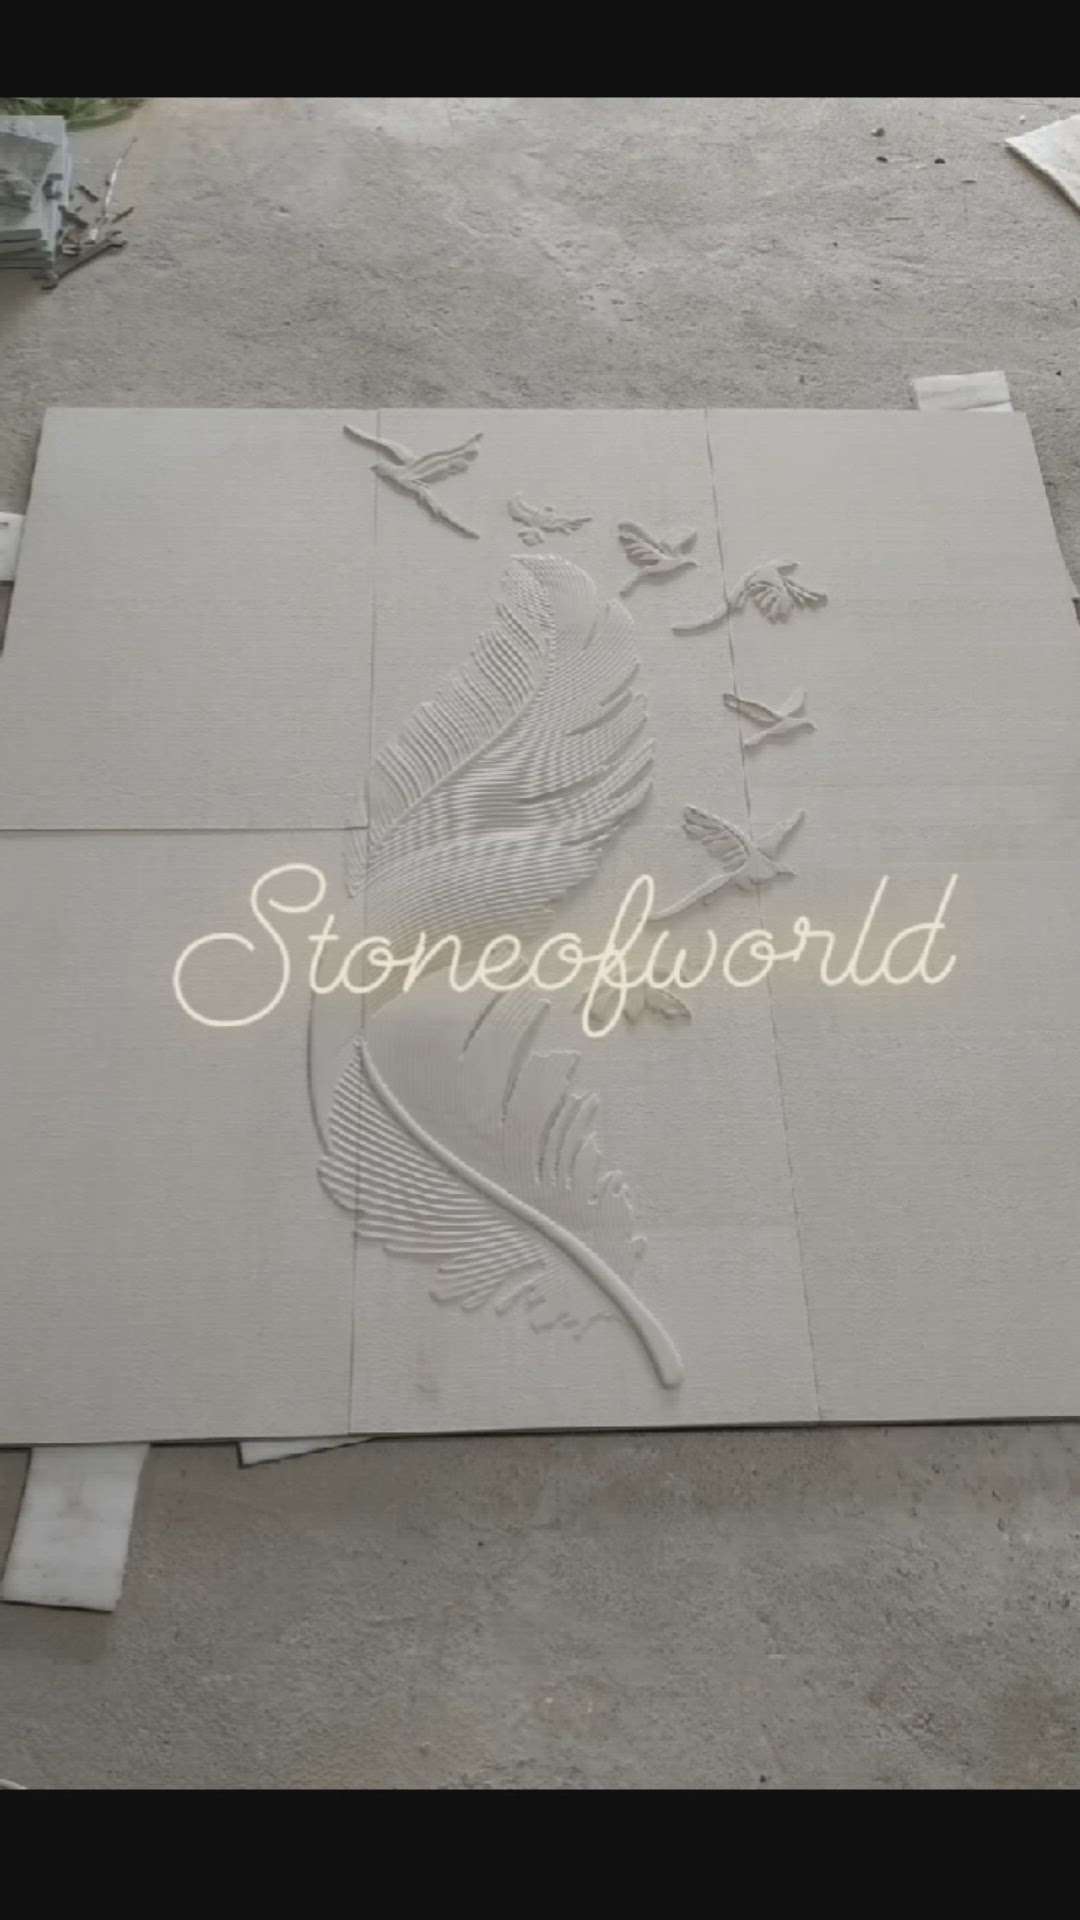 @stoneofworld 8890049119 #WallDecors  #wallpannel  #WallDesigns #wall_decors 
Stone of world is a natural stone wall cladding tiles manufacturing and design company based in Udaipur, India. Founded in 2017
https://instagram.com/stoneofworld?igshid=ZmZhODViOGI=